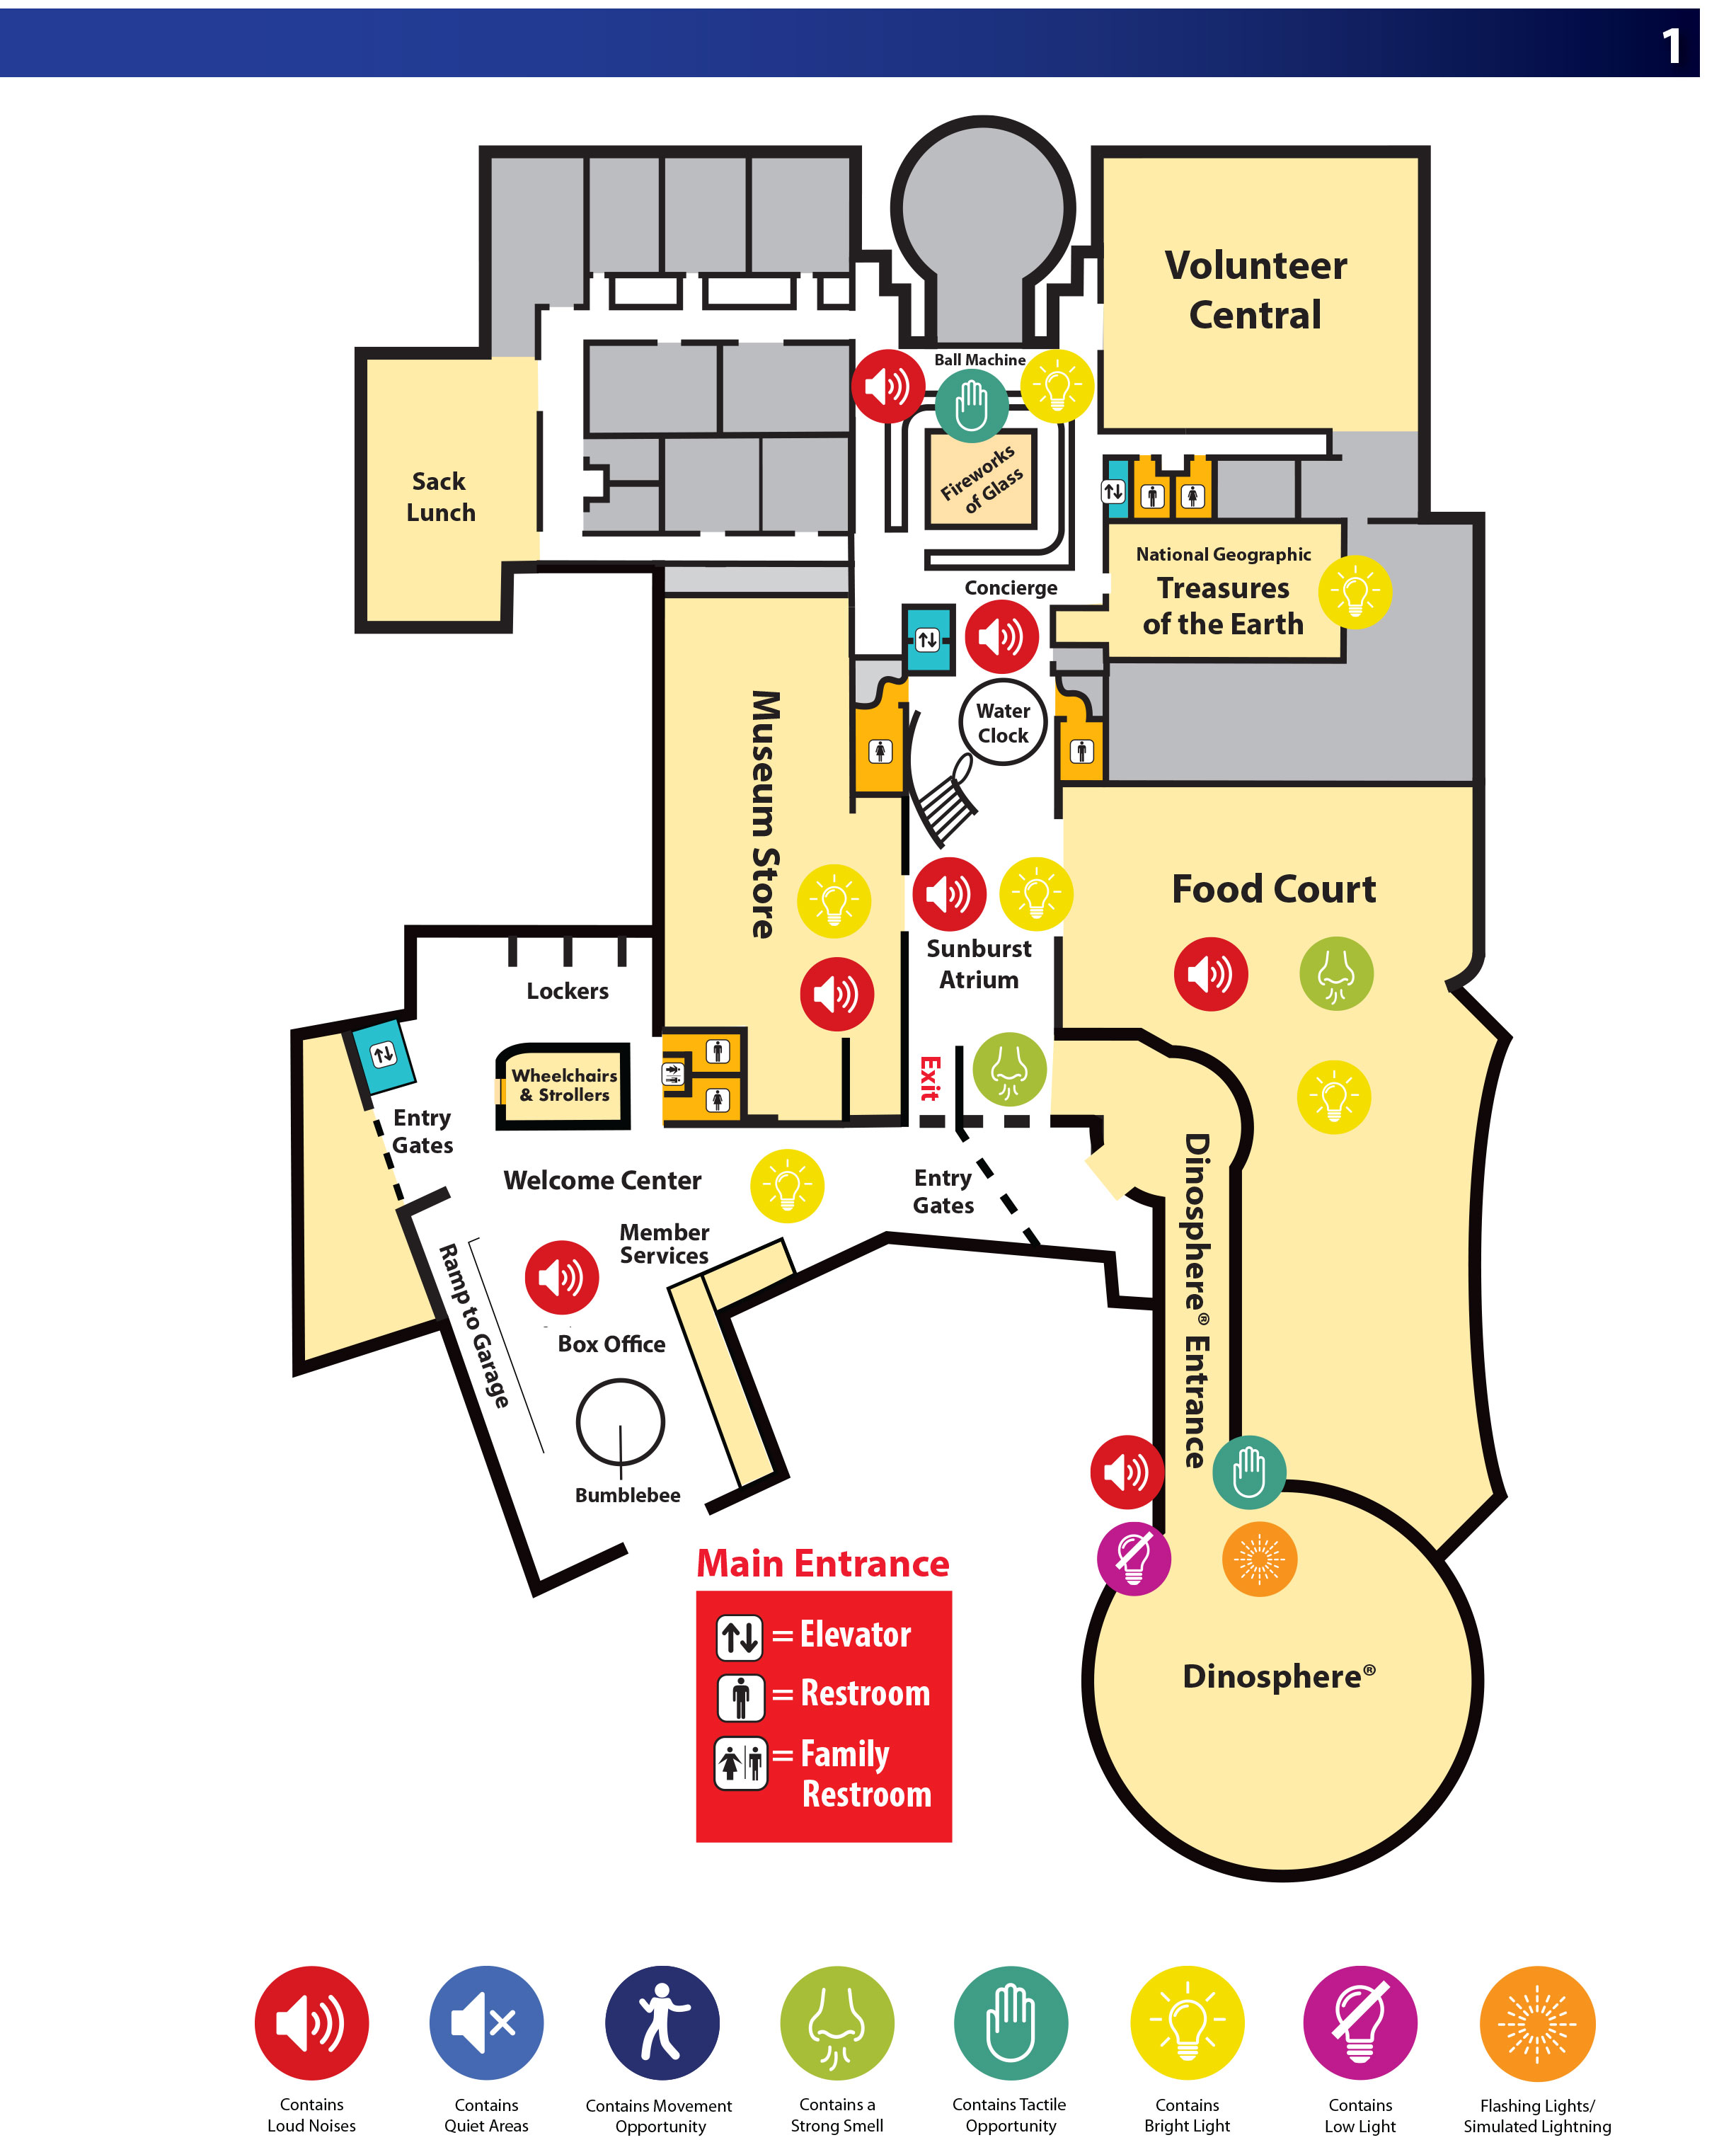 Map of Level 1 of The Children's Museum.